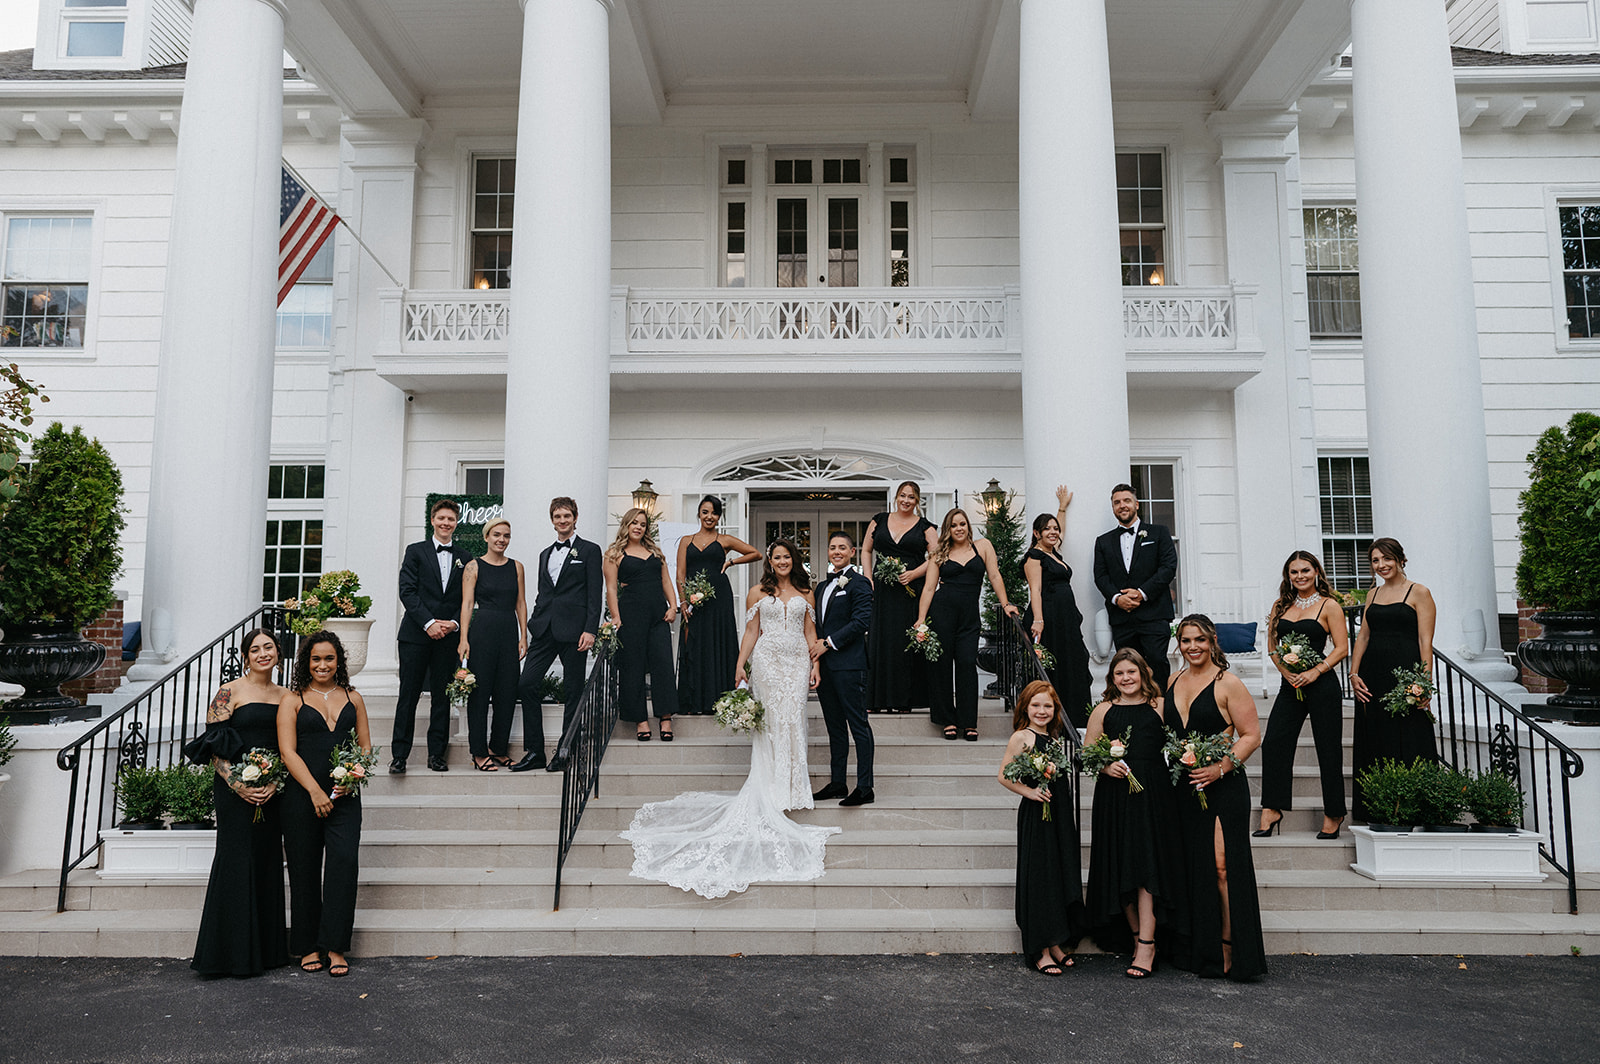 wedding party pose for portrait on the steps of the briarcliff manor wedding venue